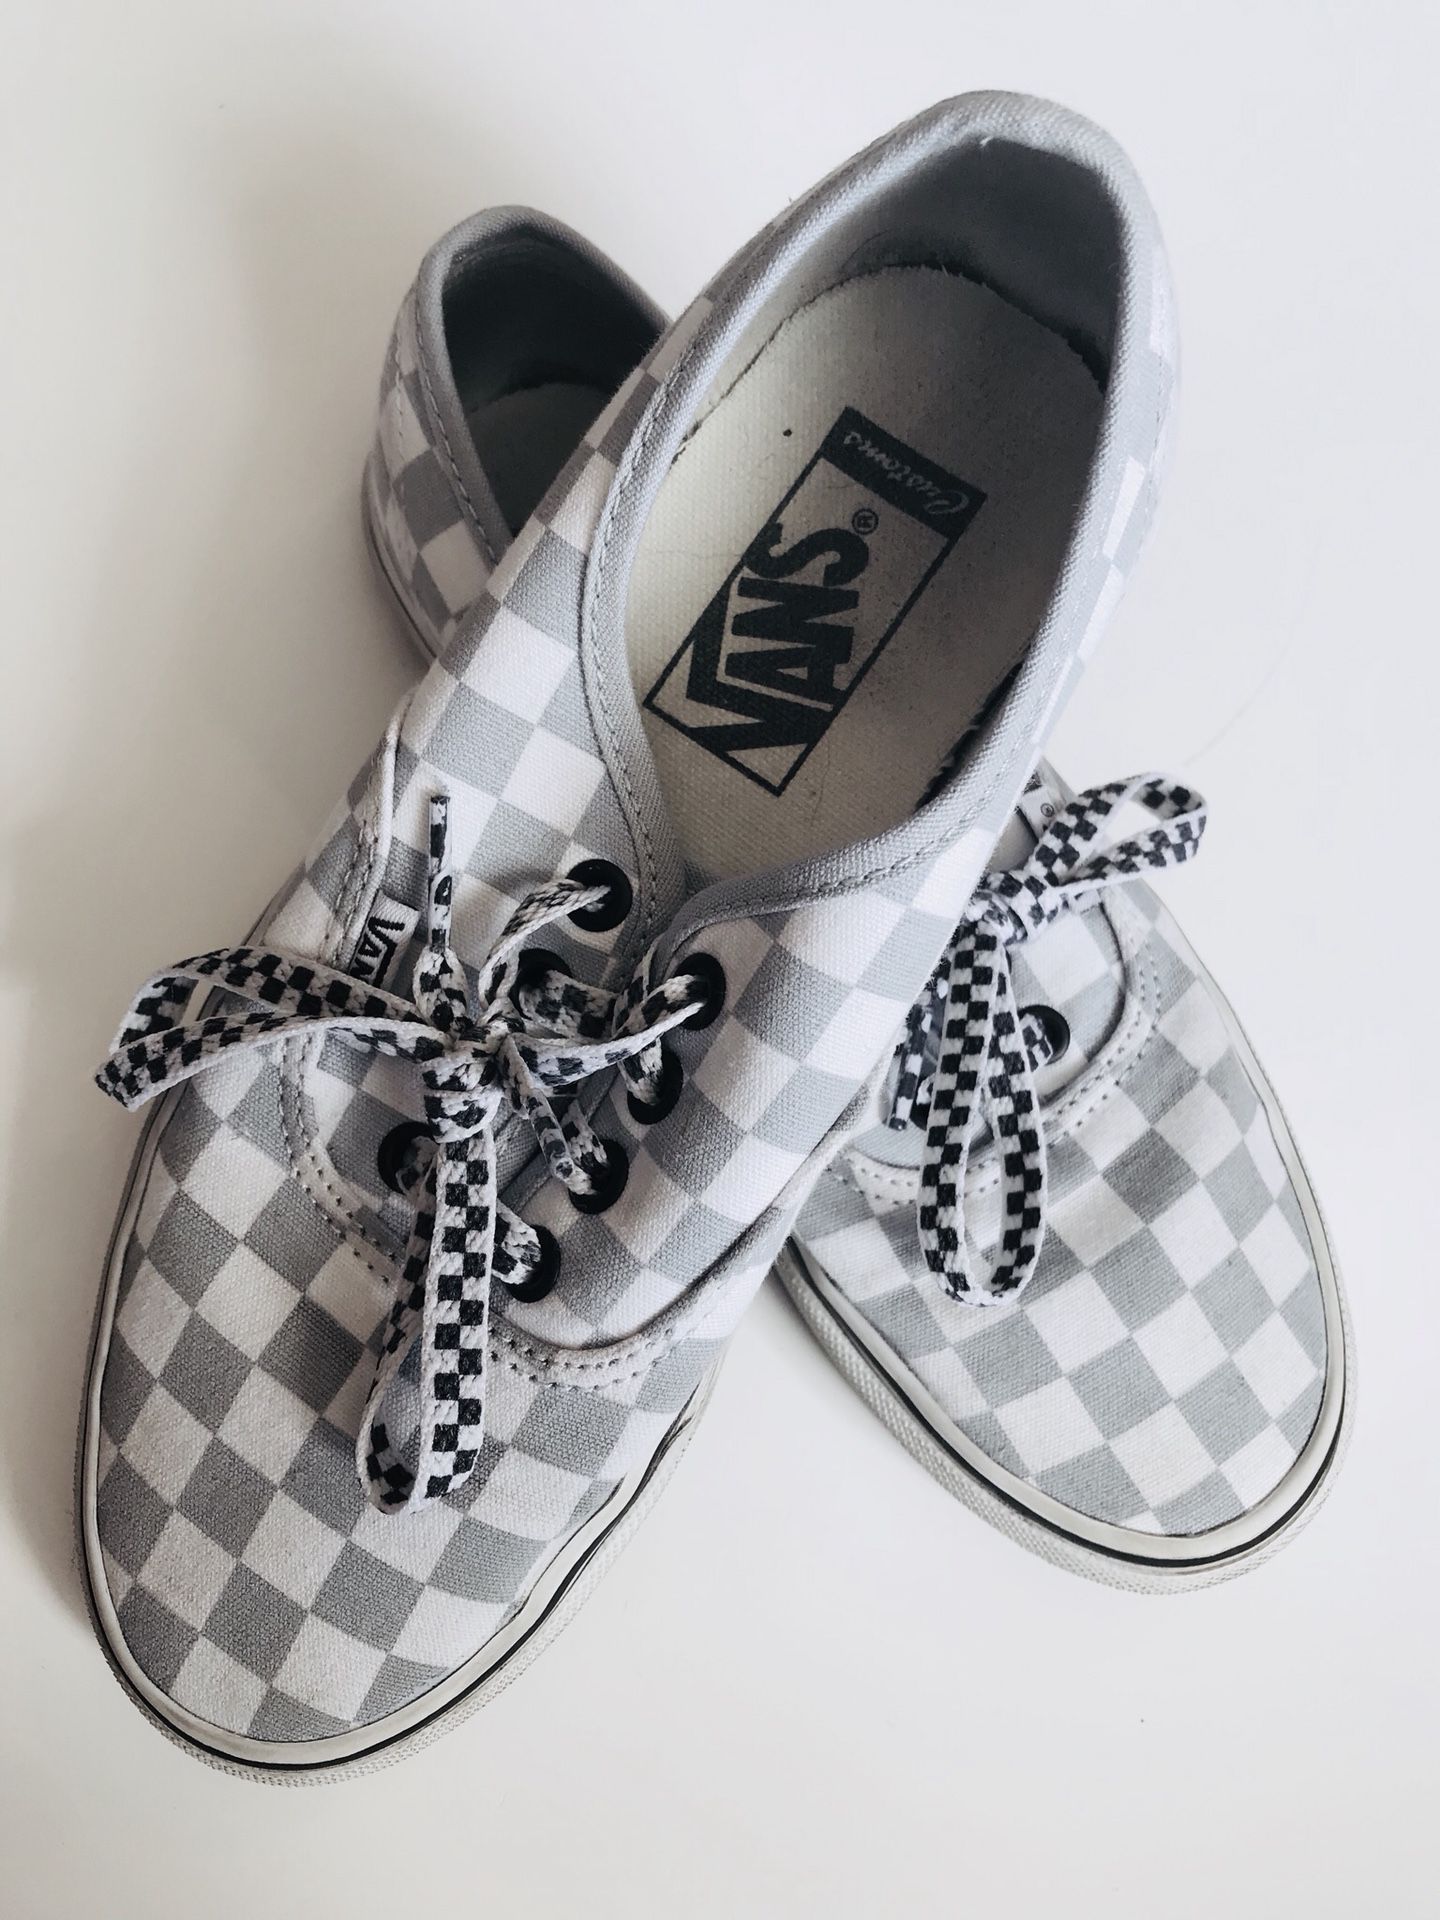 Grey and white checkered boys vans shoes size 5